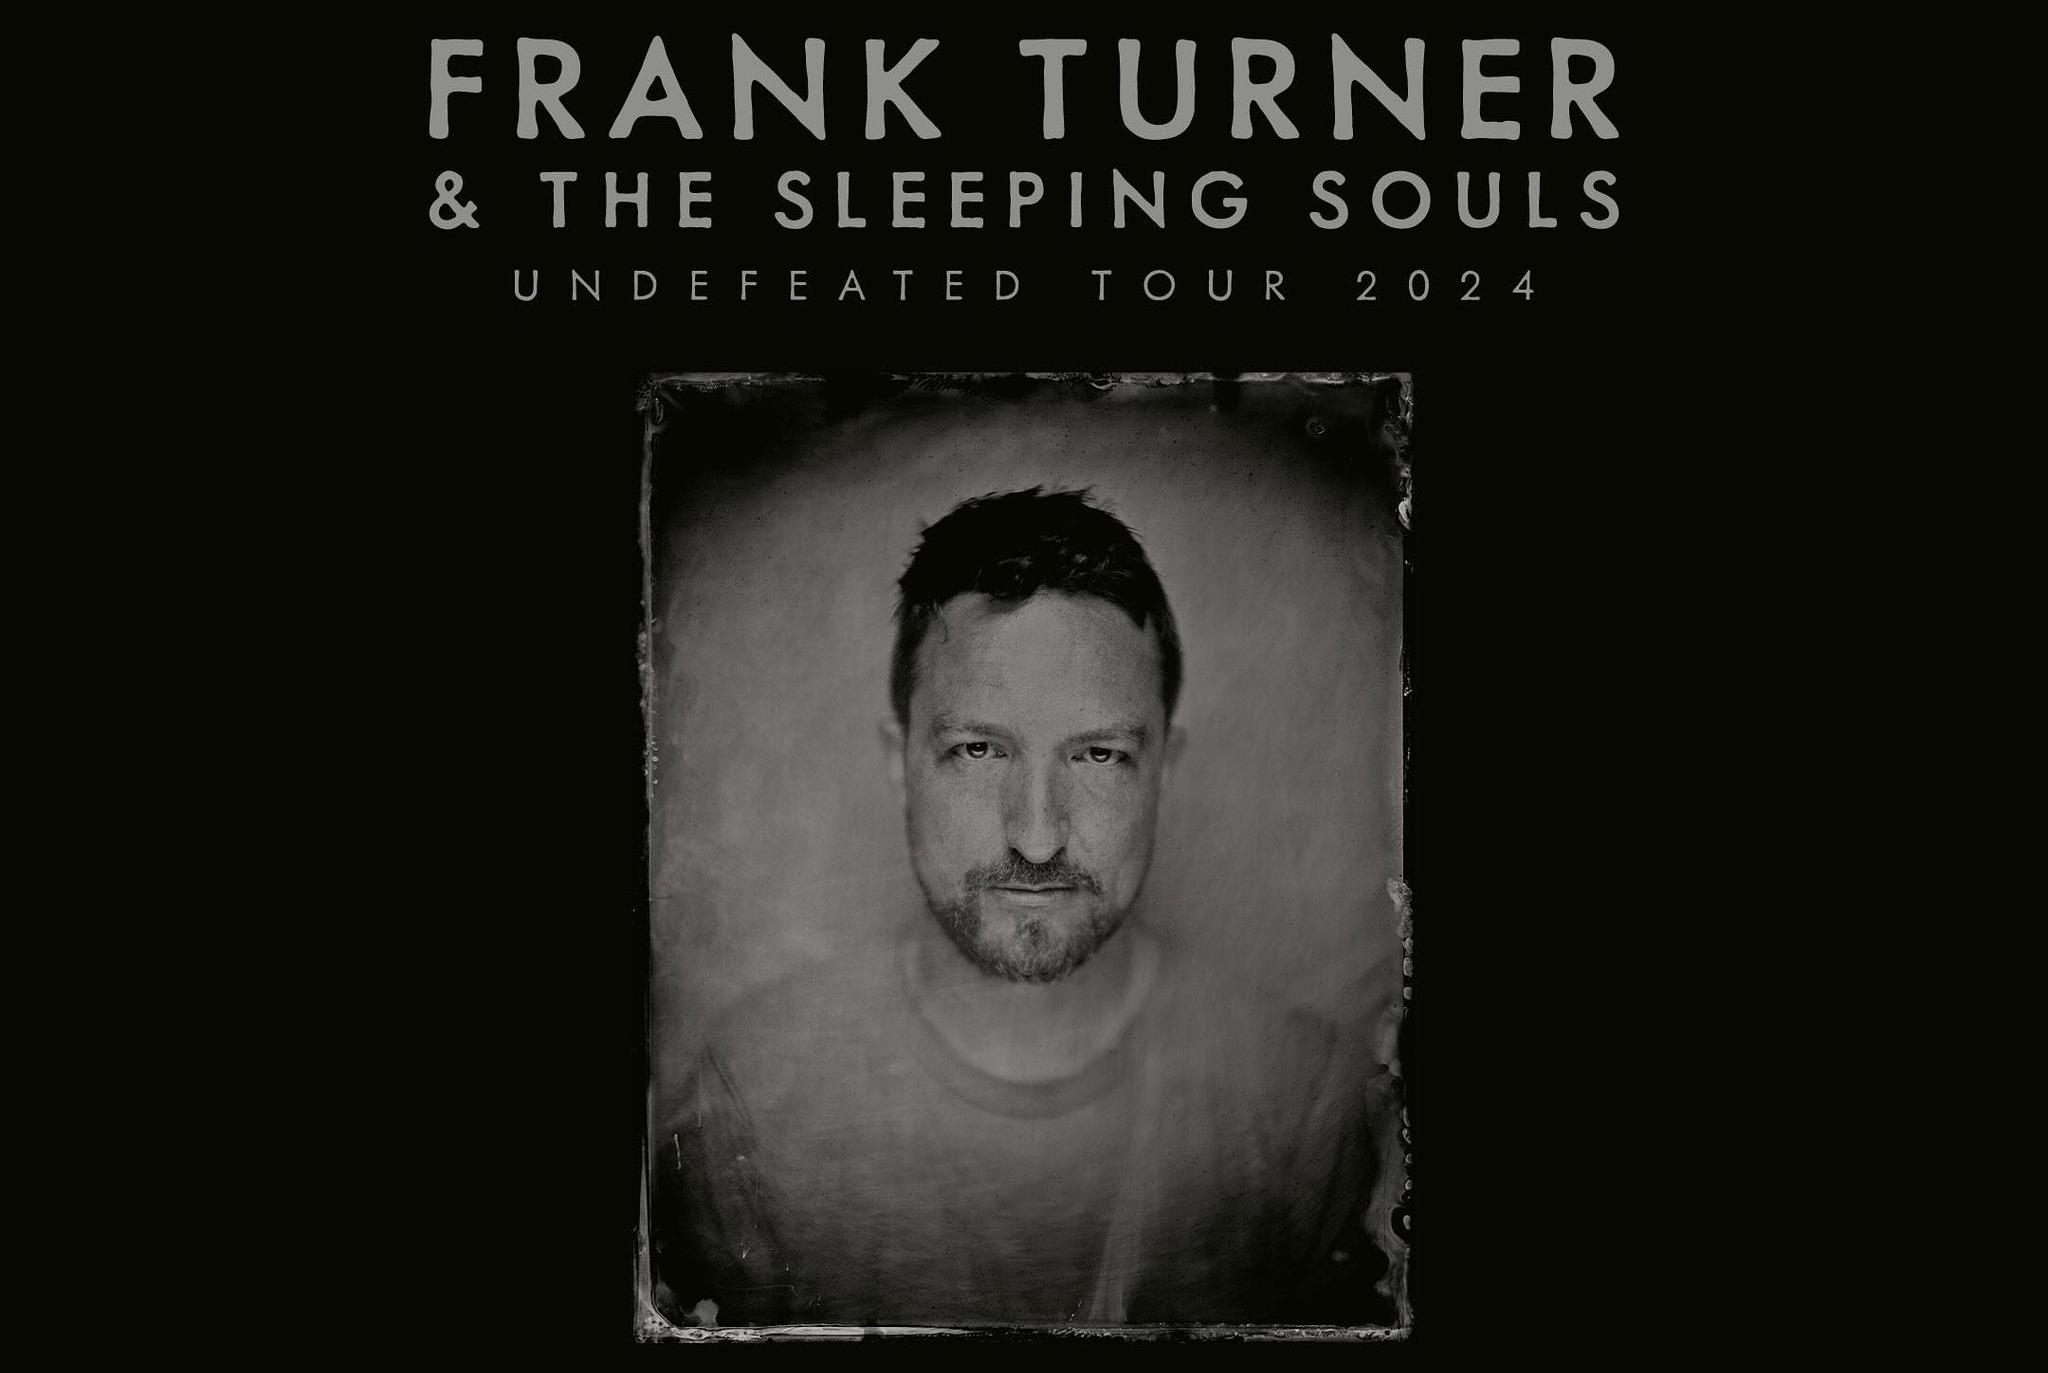 Frank Turner and The Sleeping Souls in der Alcatraz Mailand Tickets